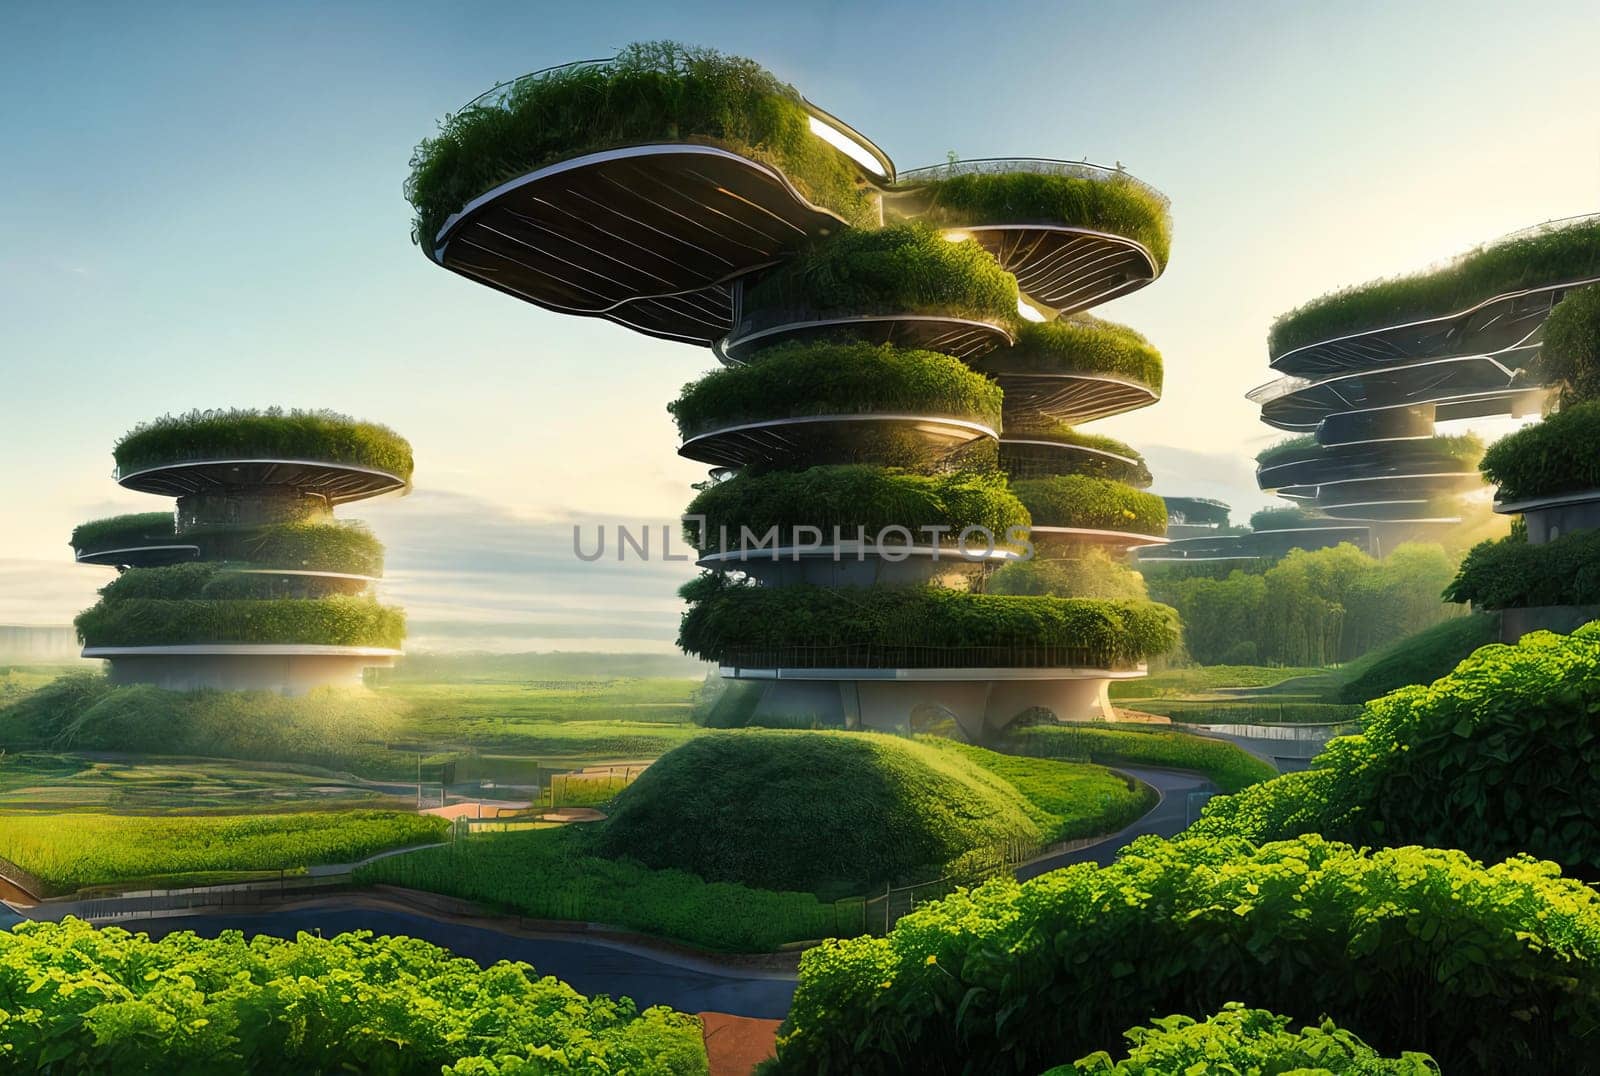 A futuristic digital masterpiece envisioning a high-tech agricultural hub. See automated farming machines thriving vertical gardens. by GoodOlga